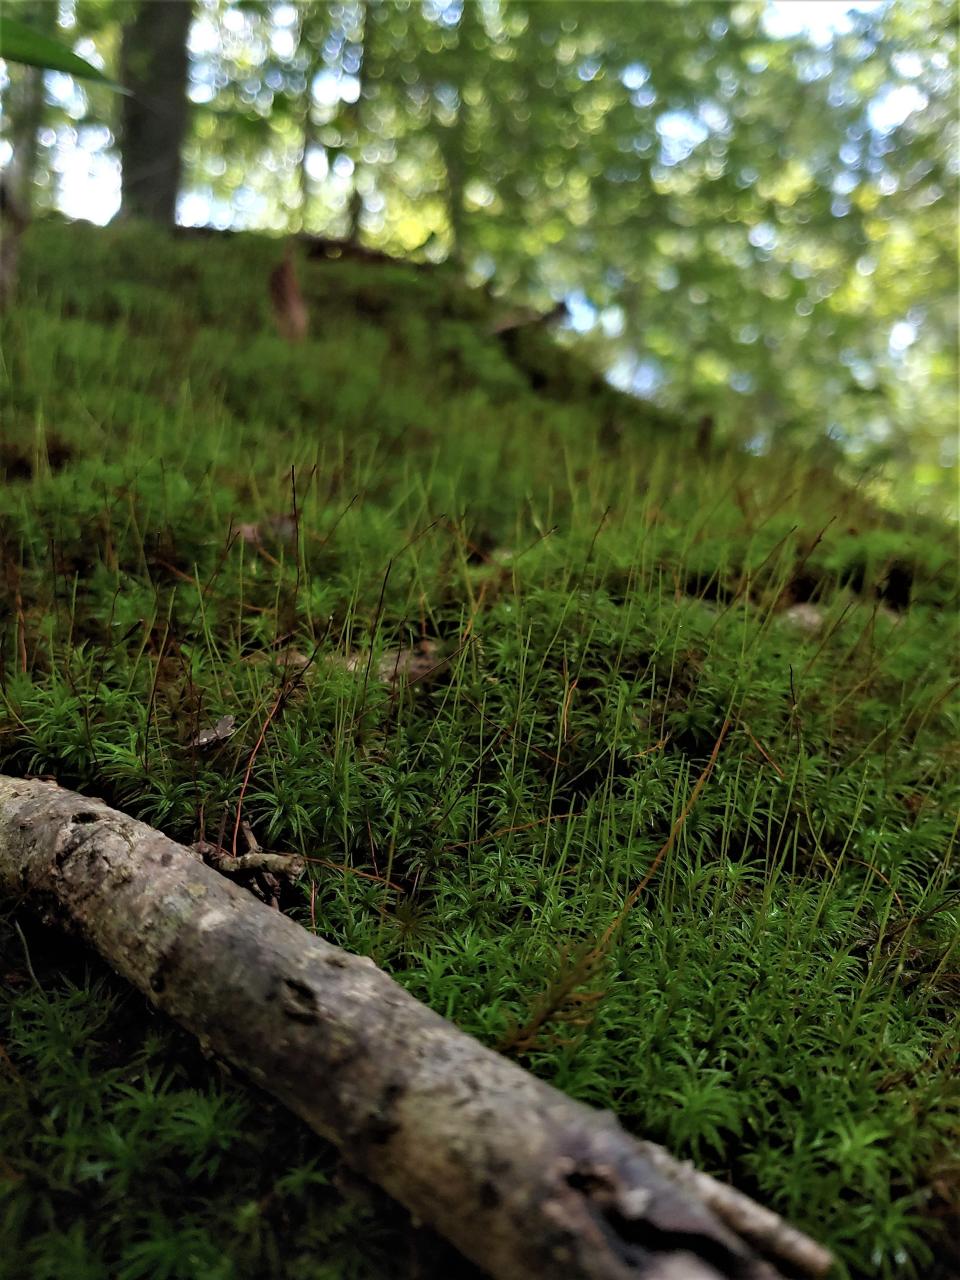 Common haircap moss (Polytrichum commune) is a highly adaptable moss, thriving in many soil types and from full shade to sun. Known for being a filter for heavy metals and superb for erosion control, here P. commune is holding together the vertical clay slopes by a stream in town.